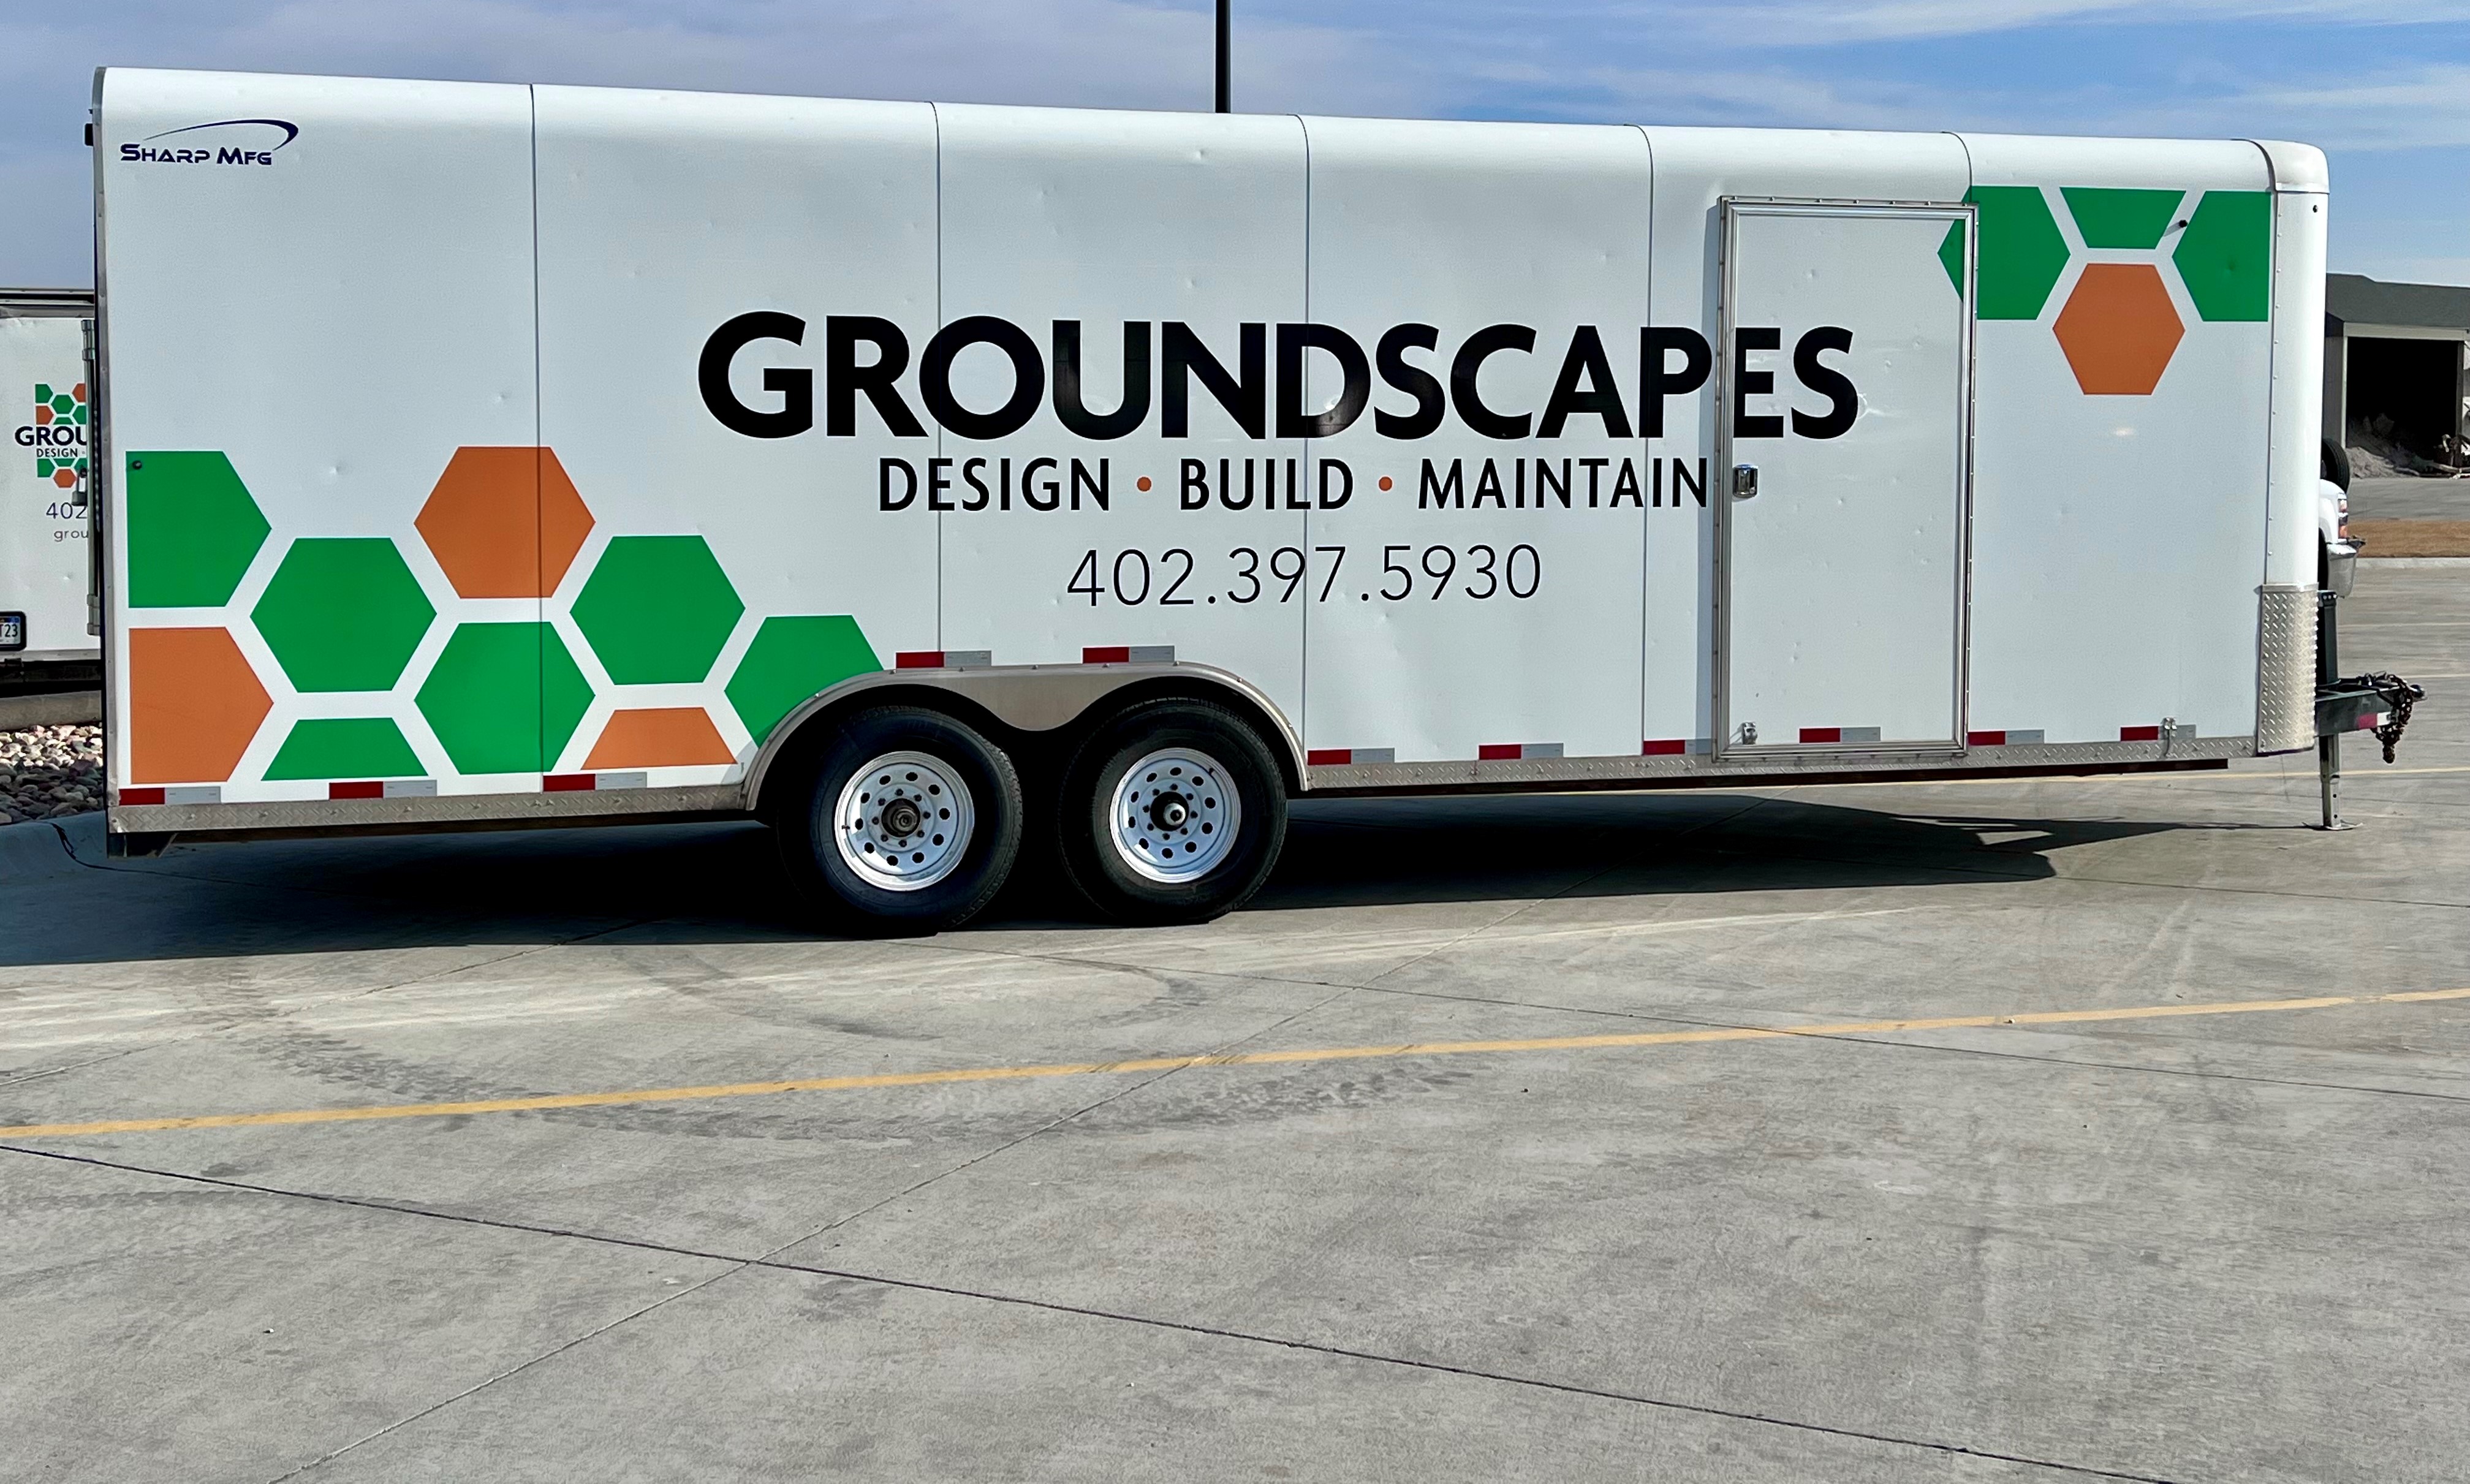 Groundscapes, Inc. work trailer in Valley, NE.